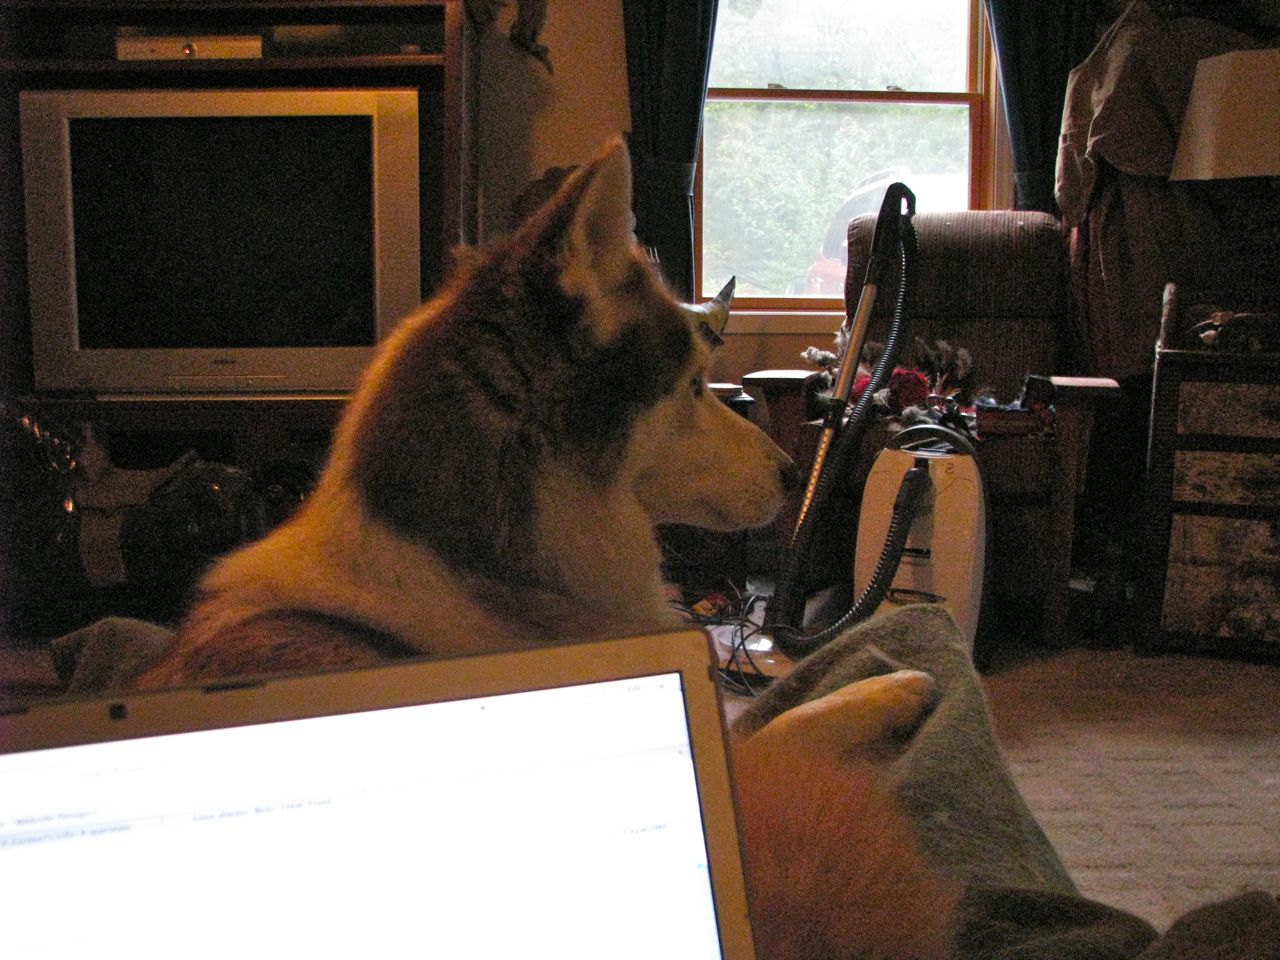 Lapdog and laptop compete for space. - hazards of working in the den